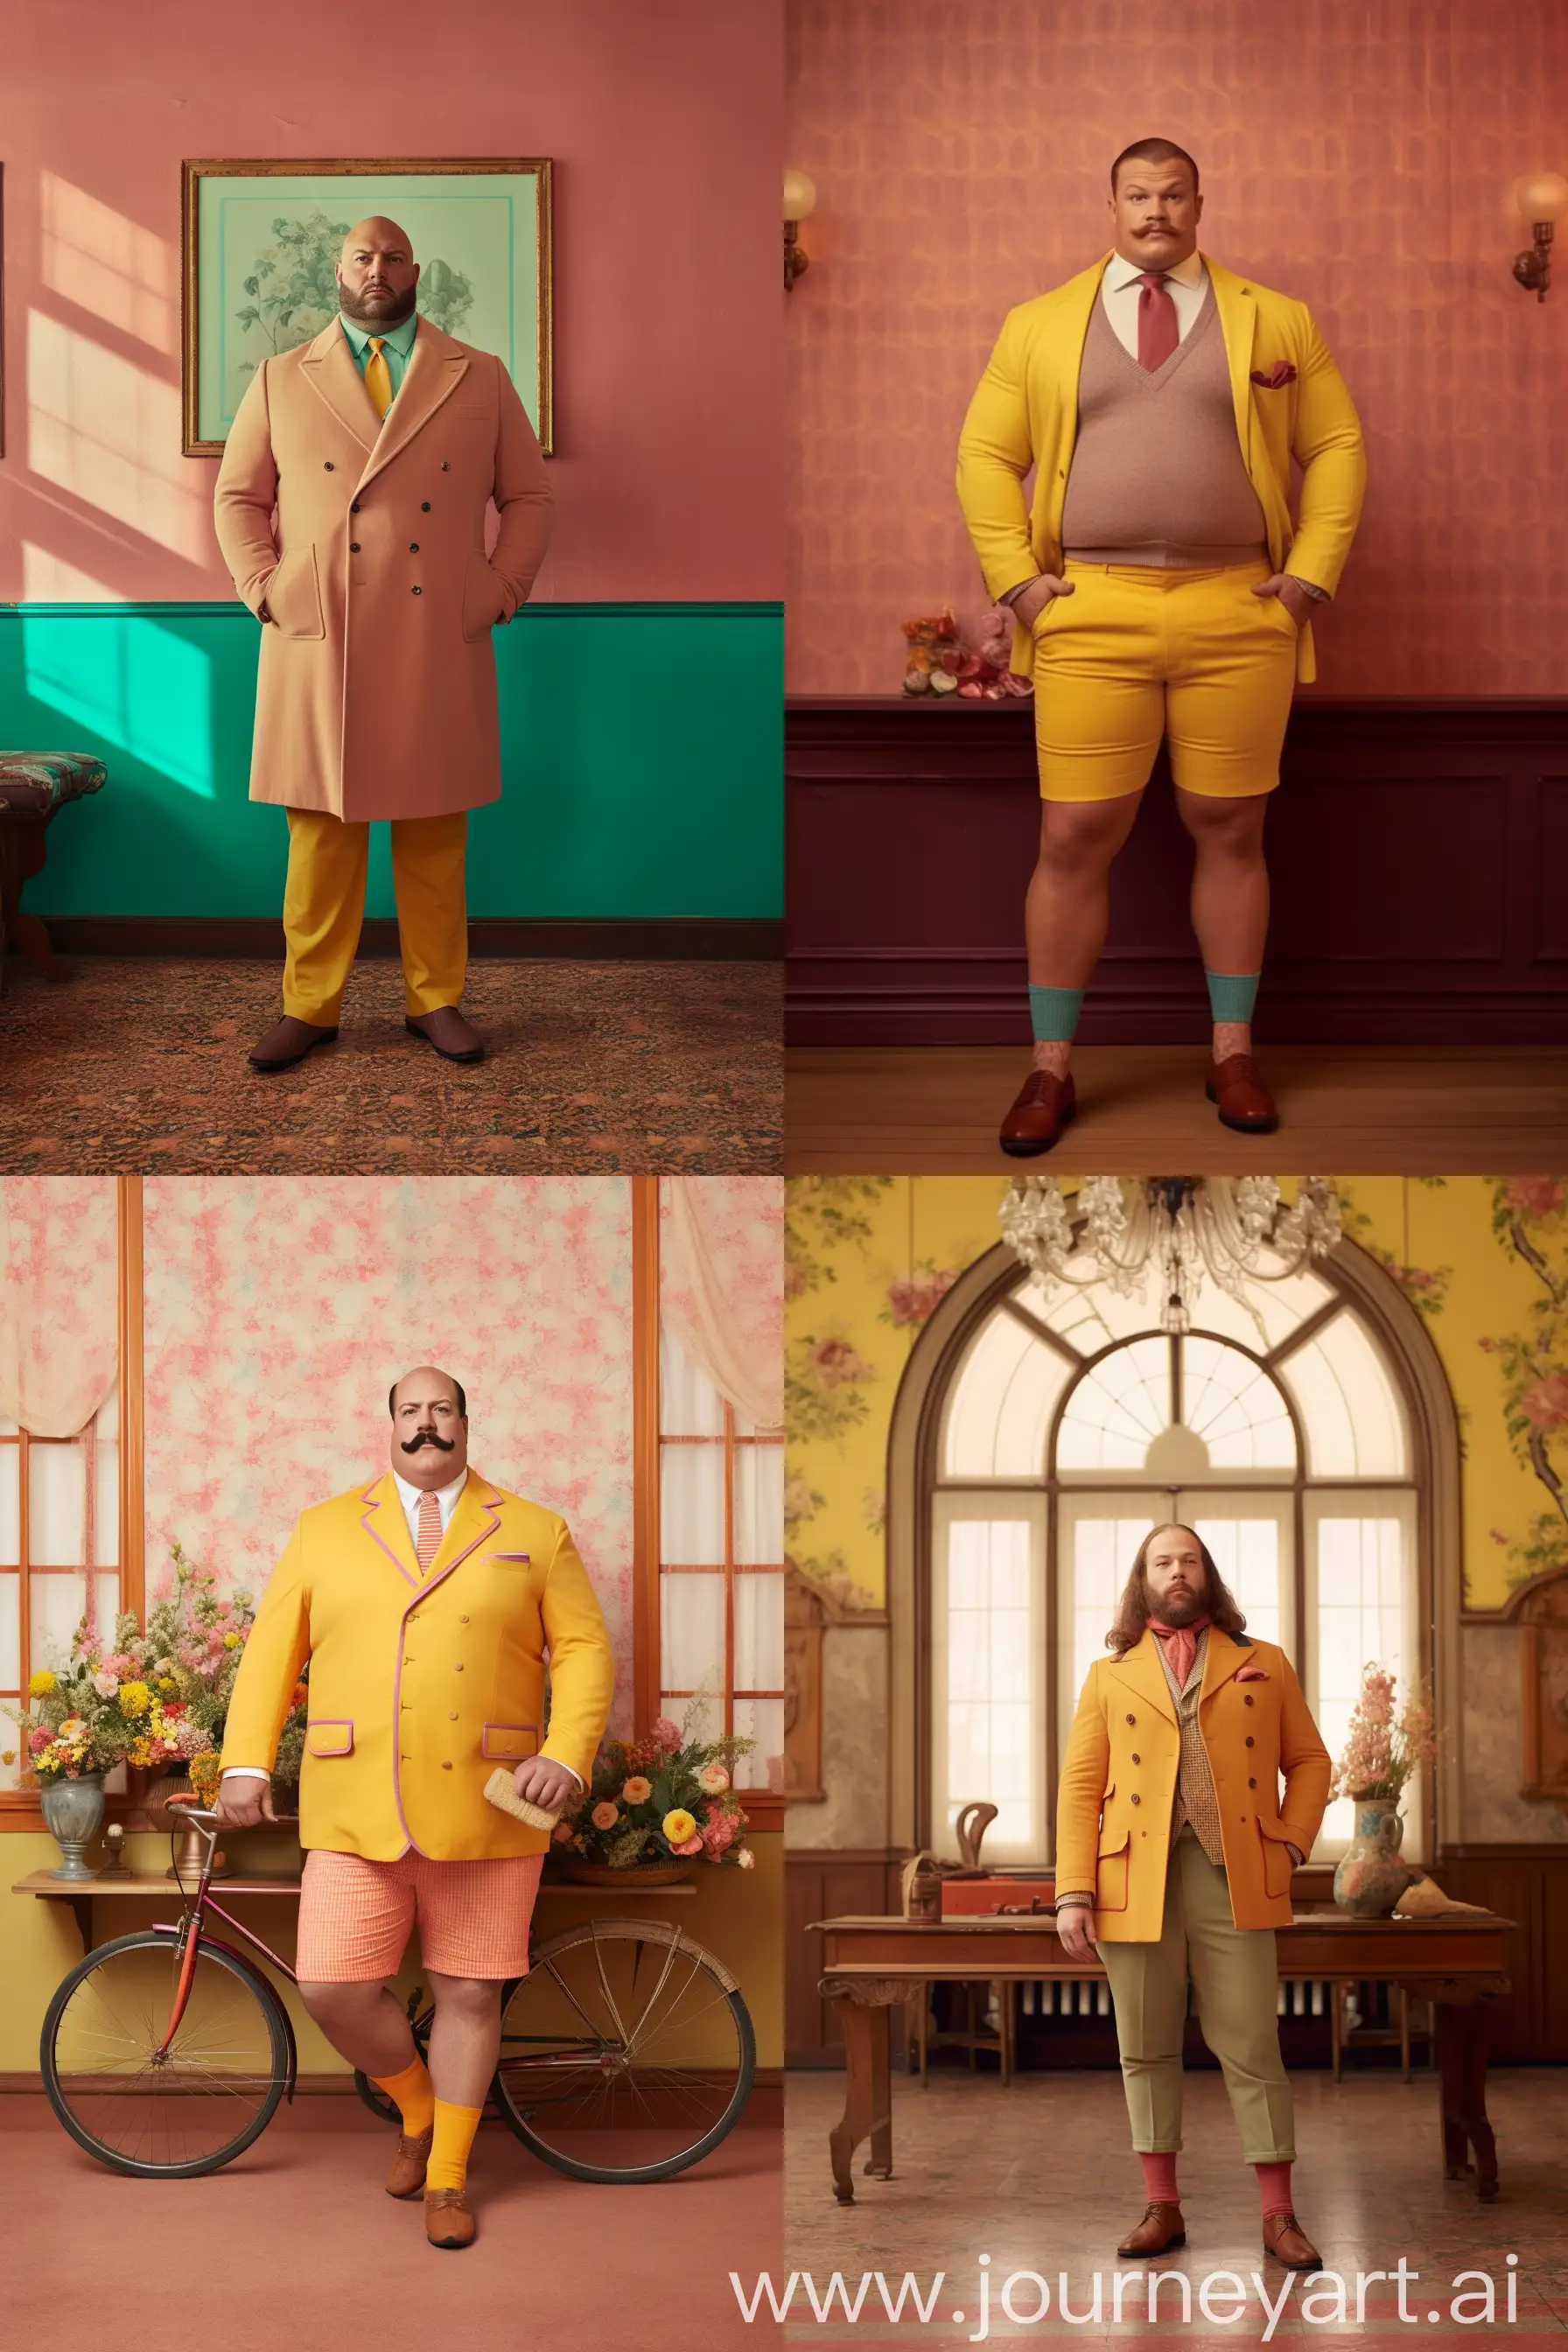 Stylish-Vogue-Photoshoot-Muscular-Man-in-Wes-Anderson-Attire